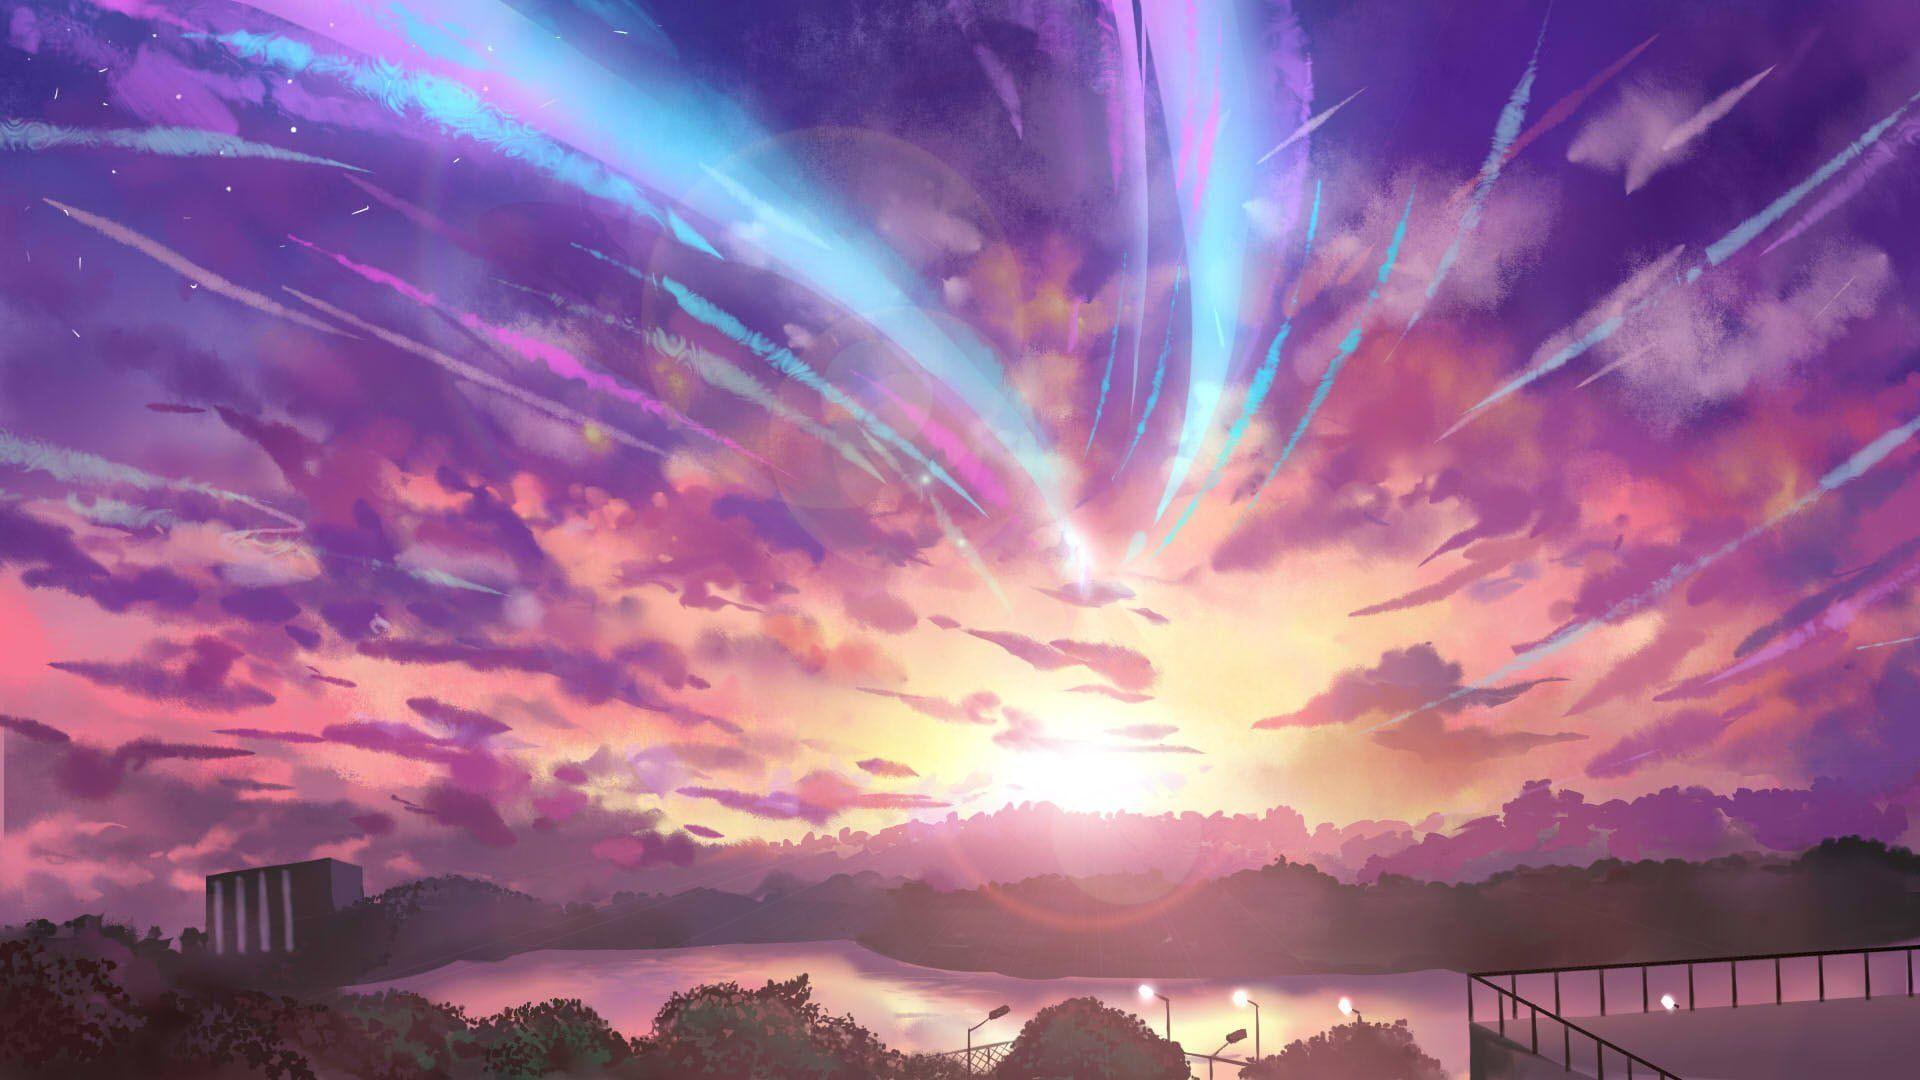 Your Name Scenery Wallpapers - Top Free Your Name Scenery Backgrounds